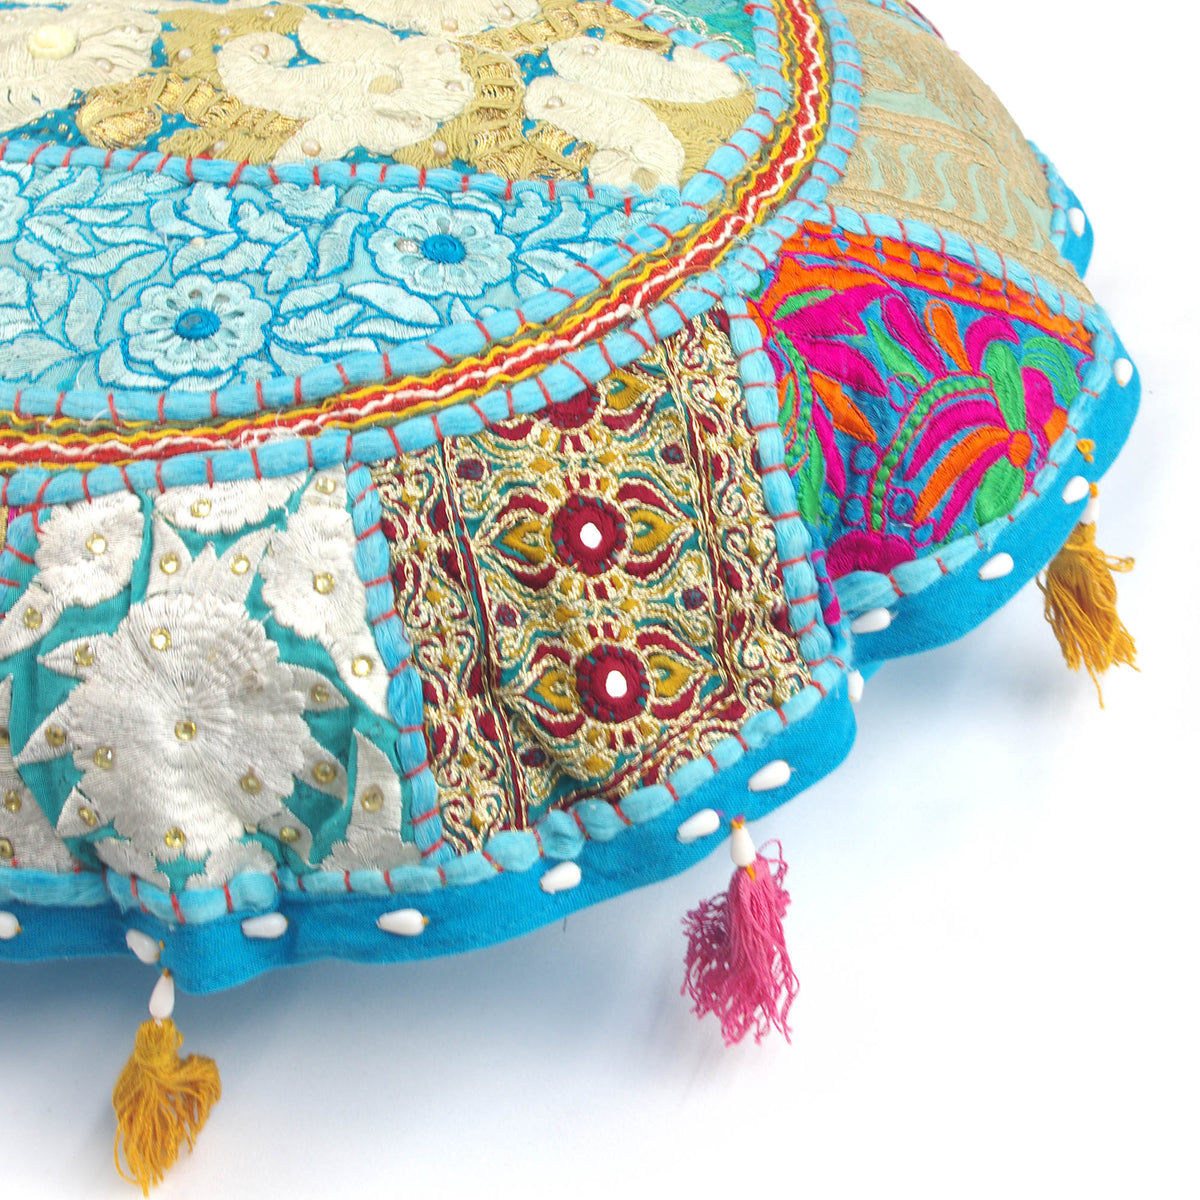 SkyBlue Kashmiri Round Floor Embroidered Patchwork Pouf Ottoman Indian Vintage Cushion Cover 18"